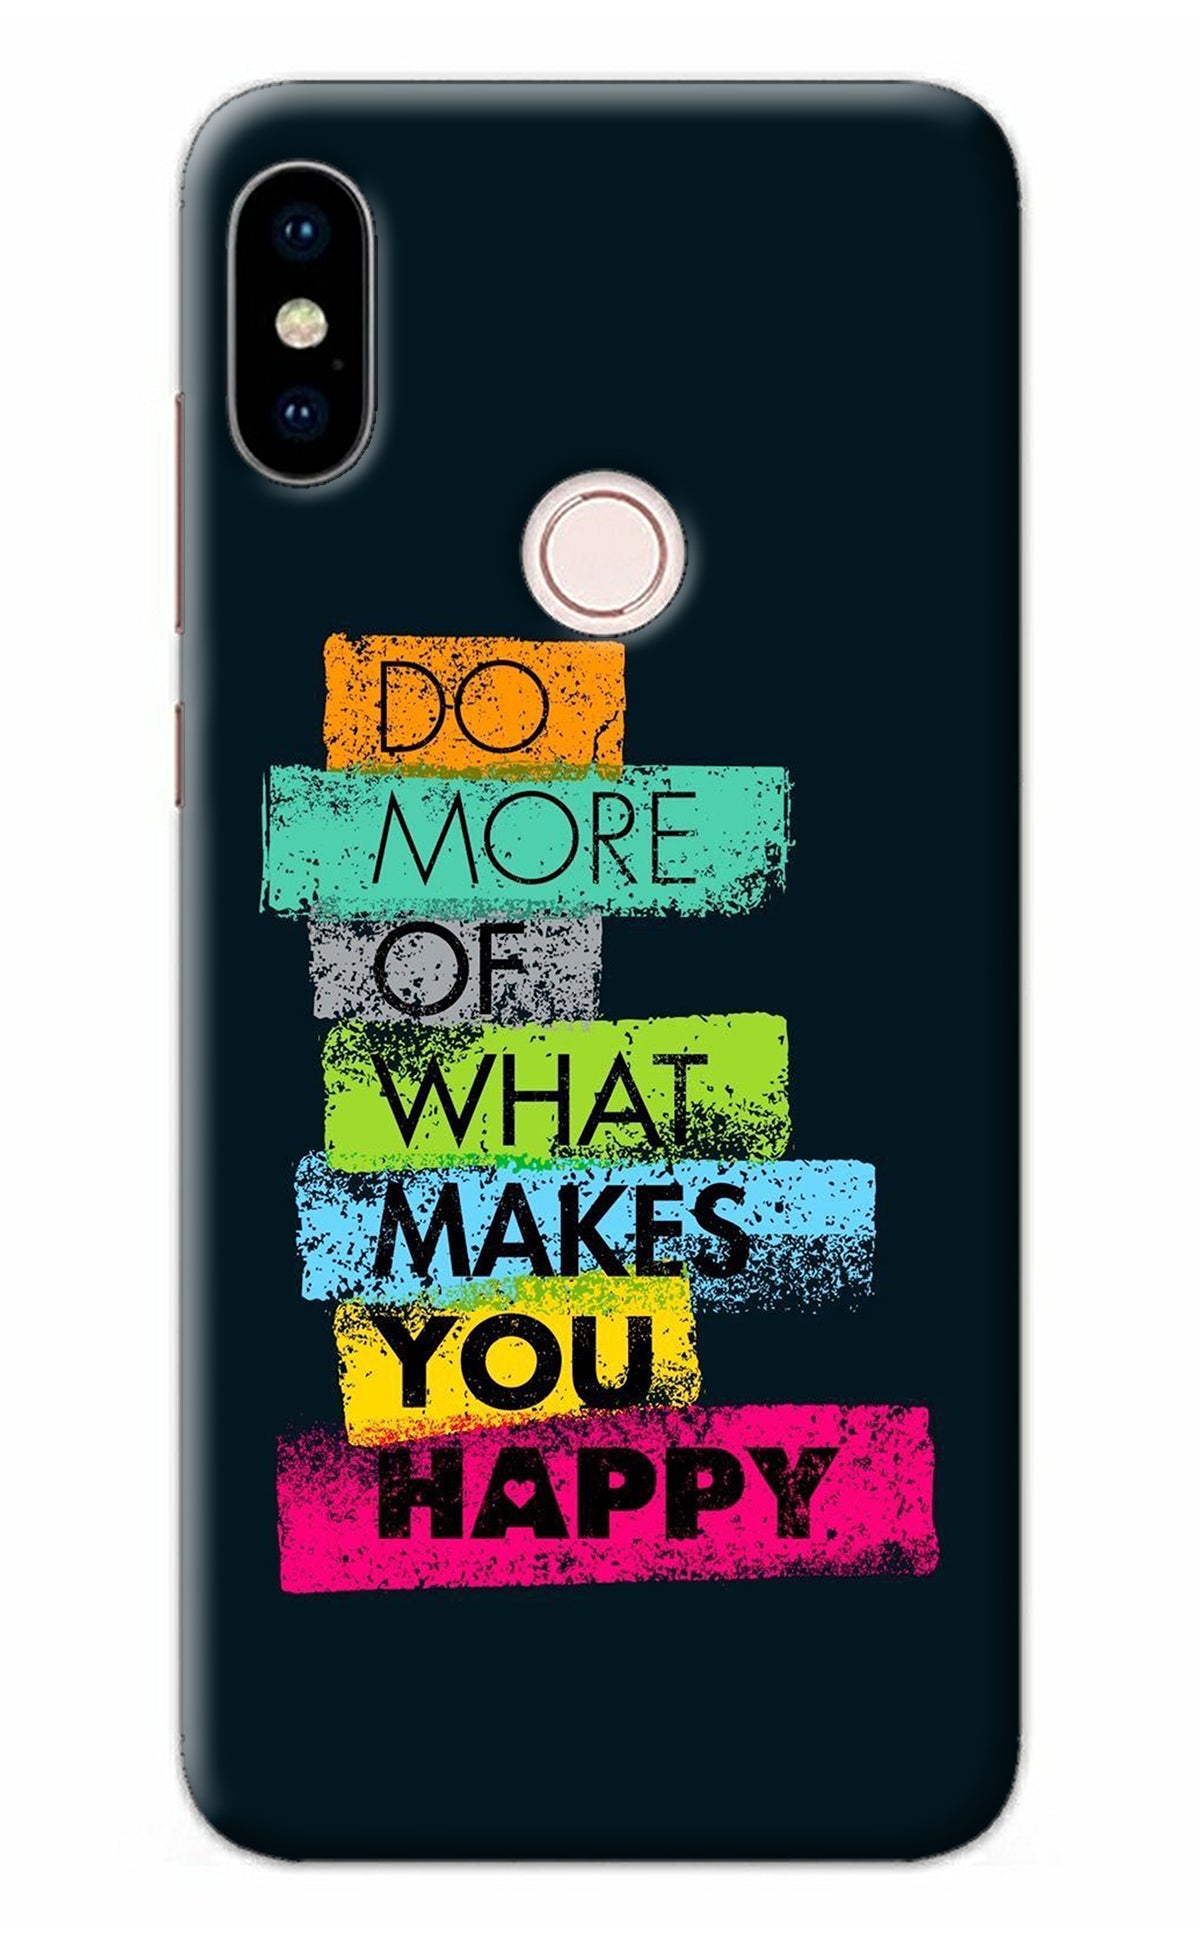 Do More Of What Makes You Happy Redmi Note 5 Pro Back Cover